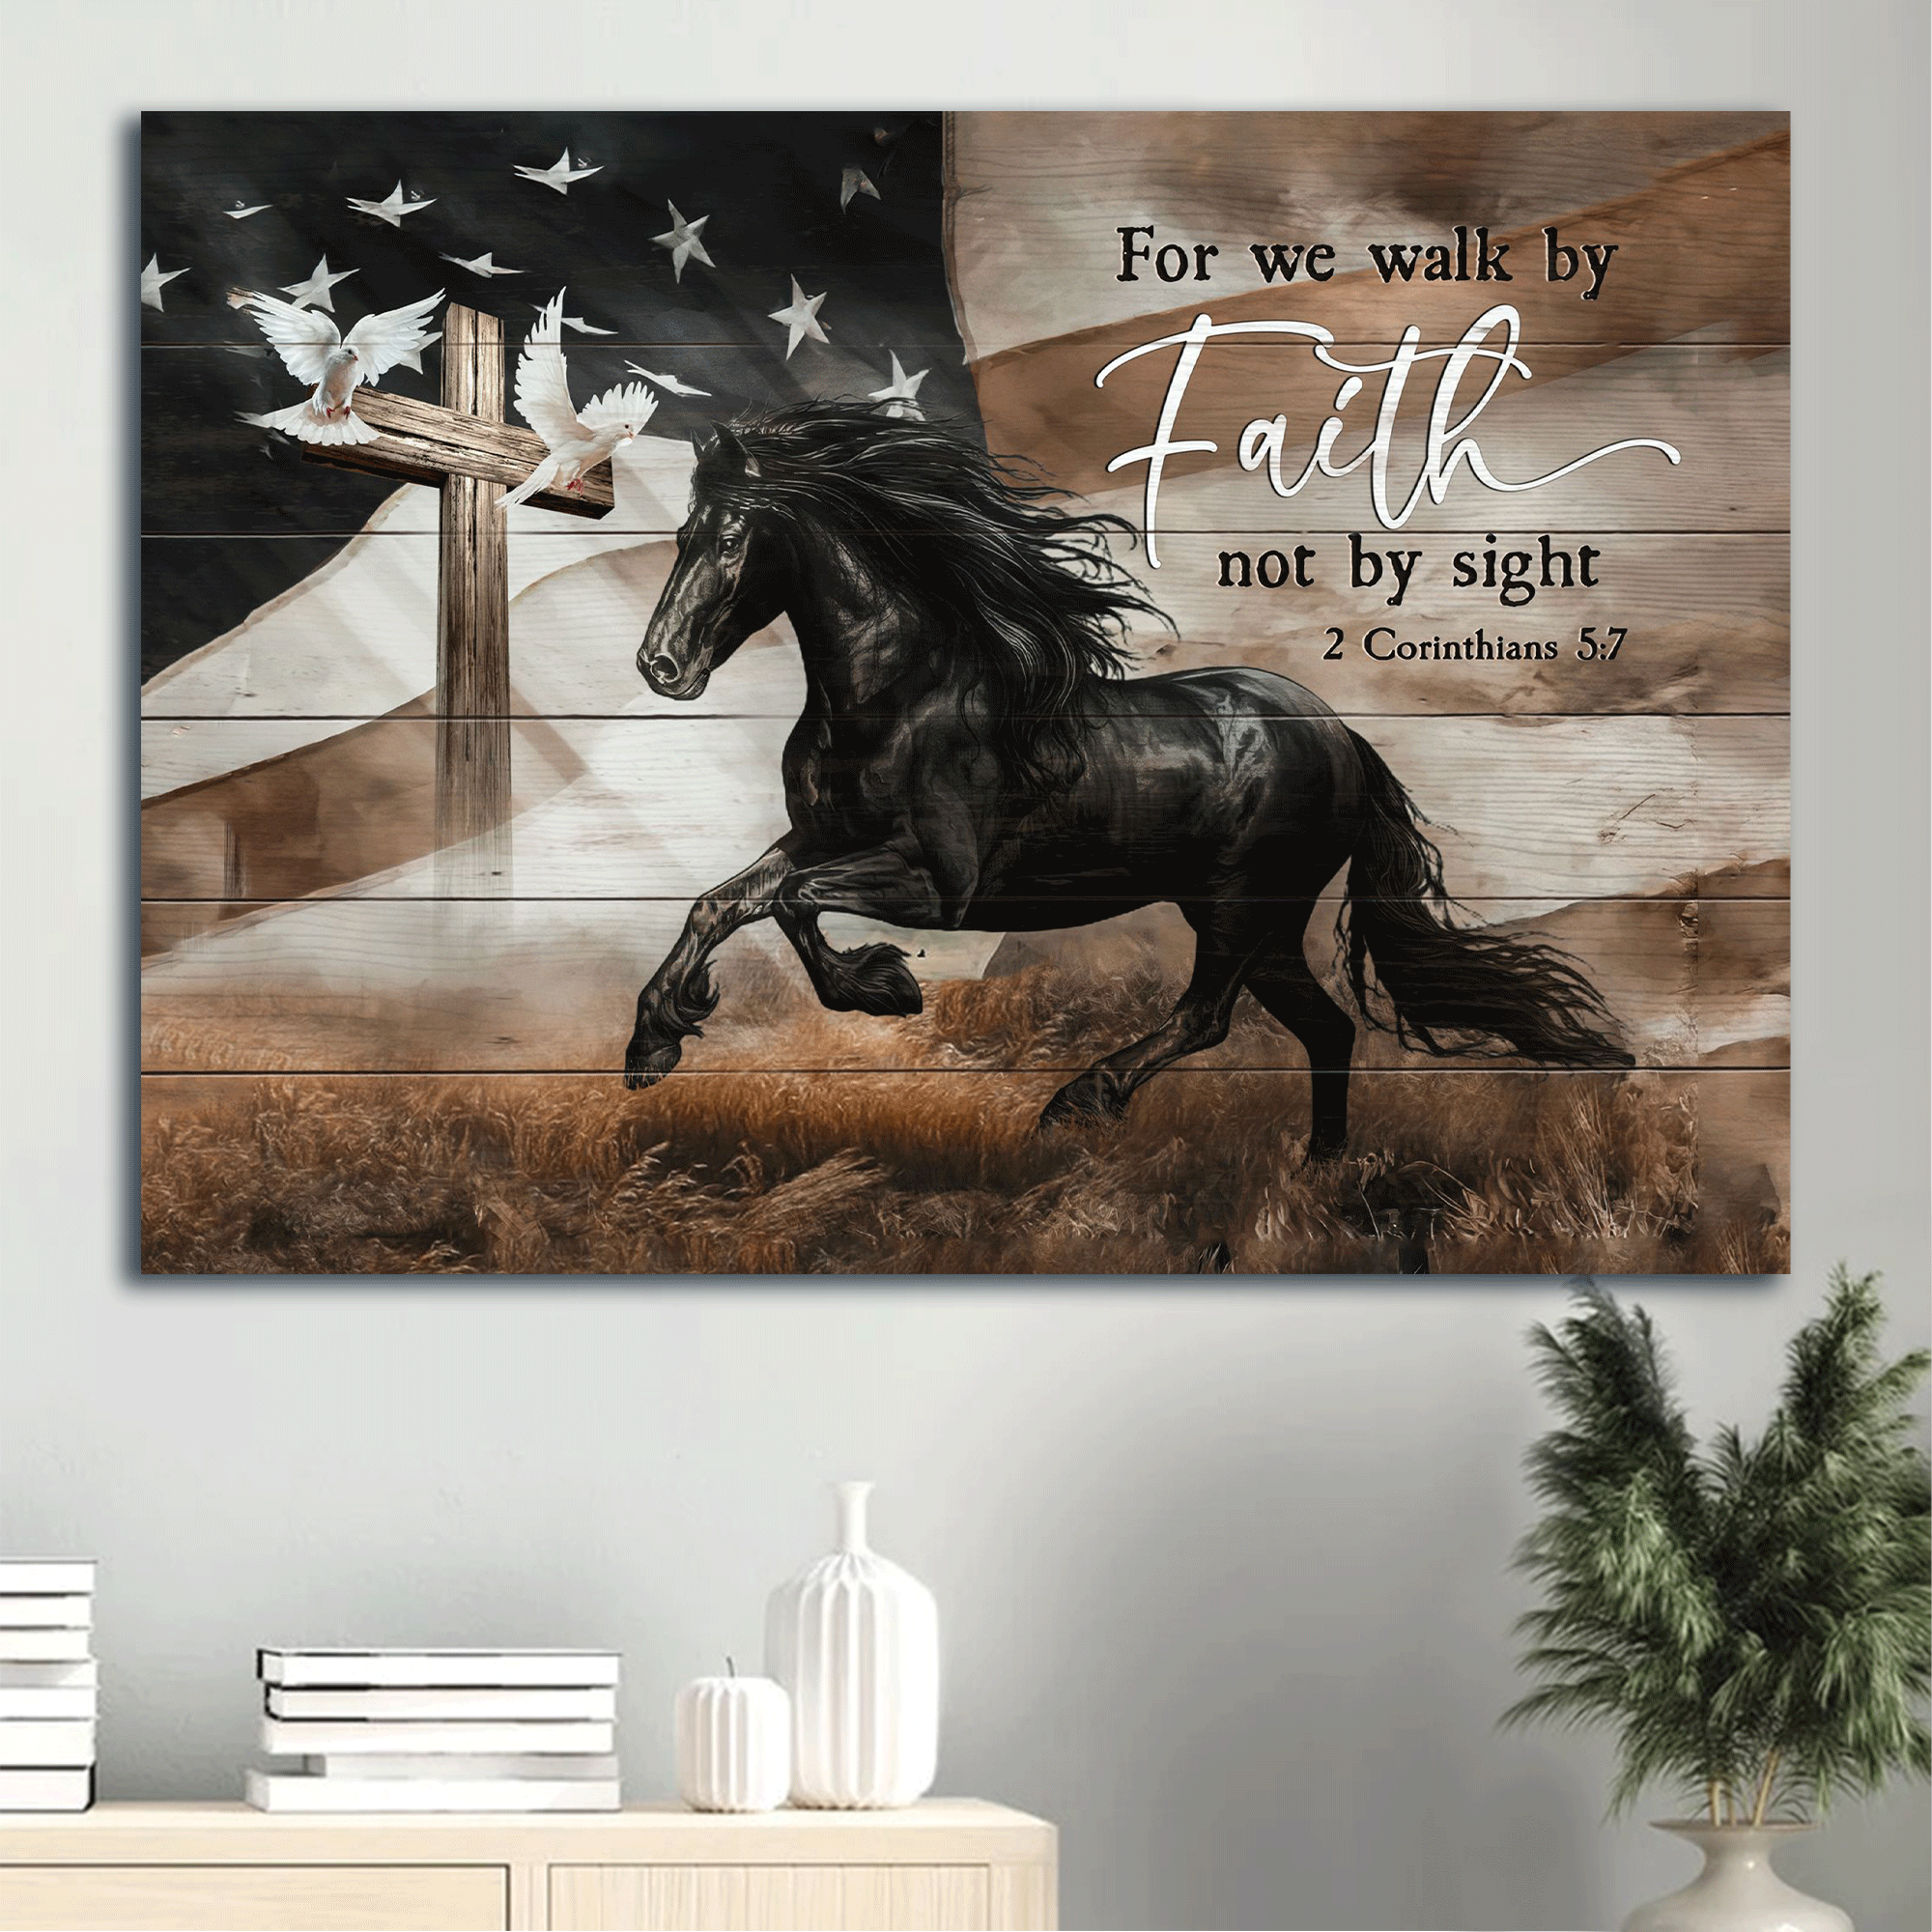 Jesus Landscape Canvas- Black horse, The US flag, Dove, Wooden Cross- Gift for Christian- For we walk by faith - Landscape Canvas Prints, Wall Art